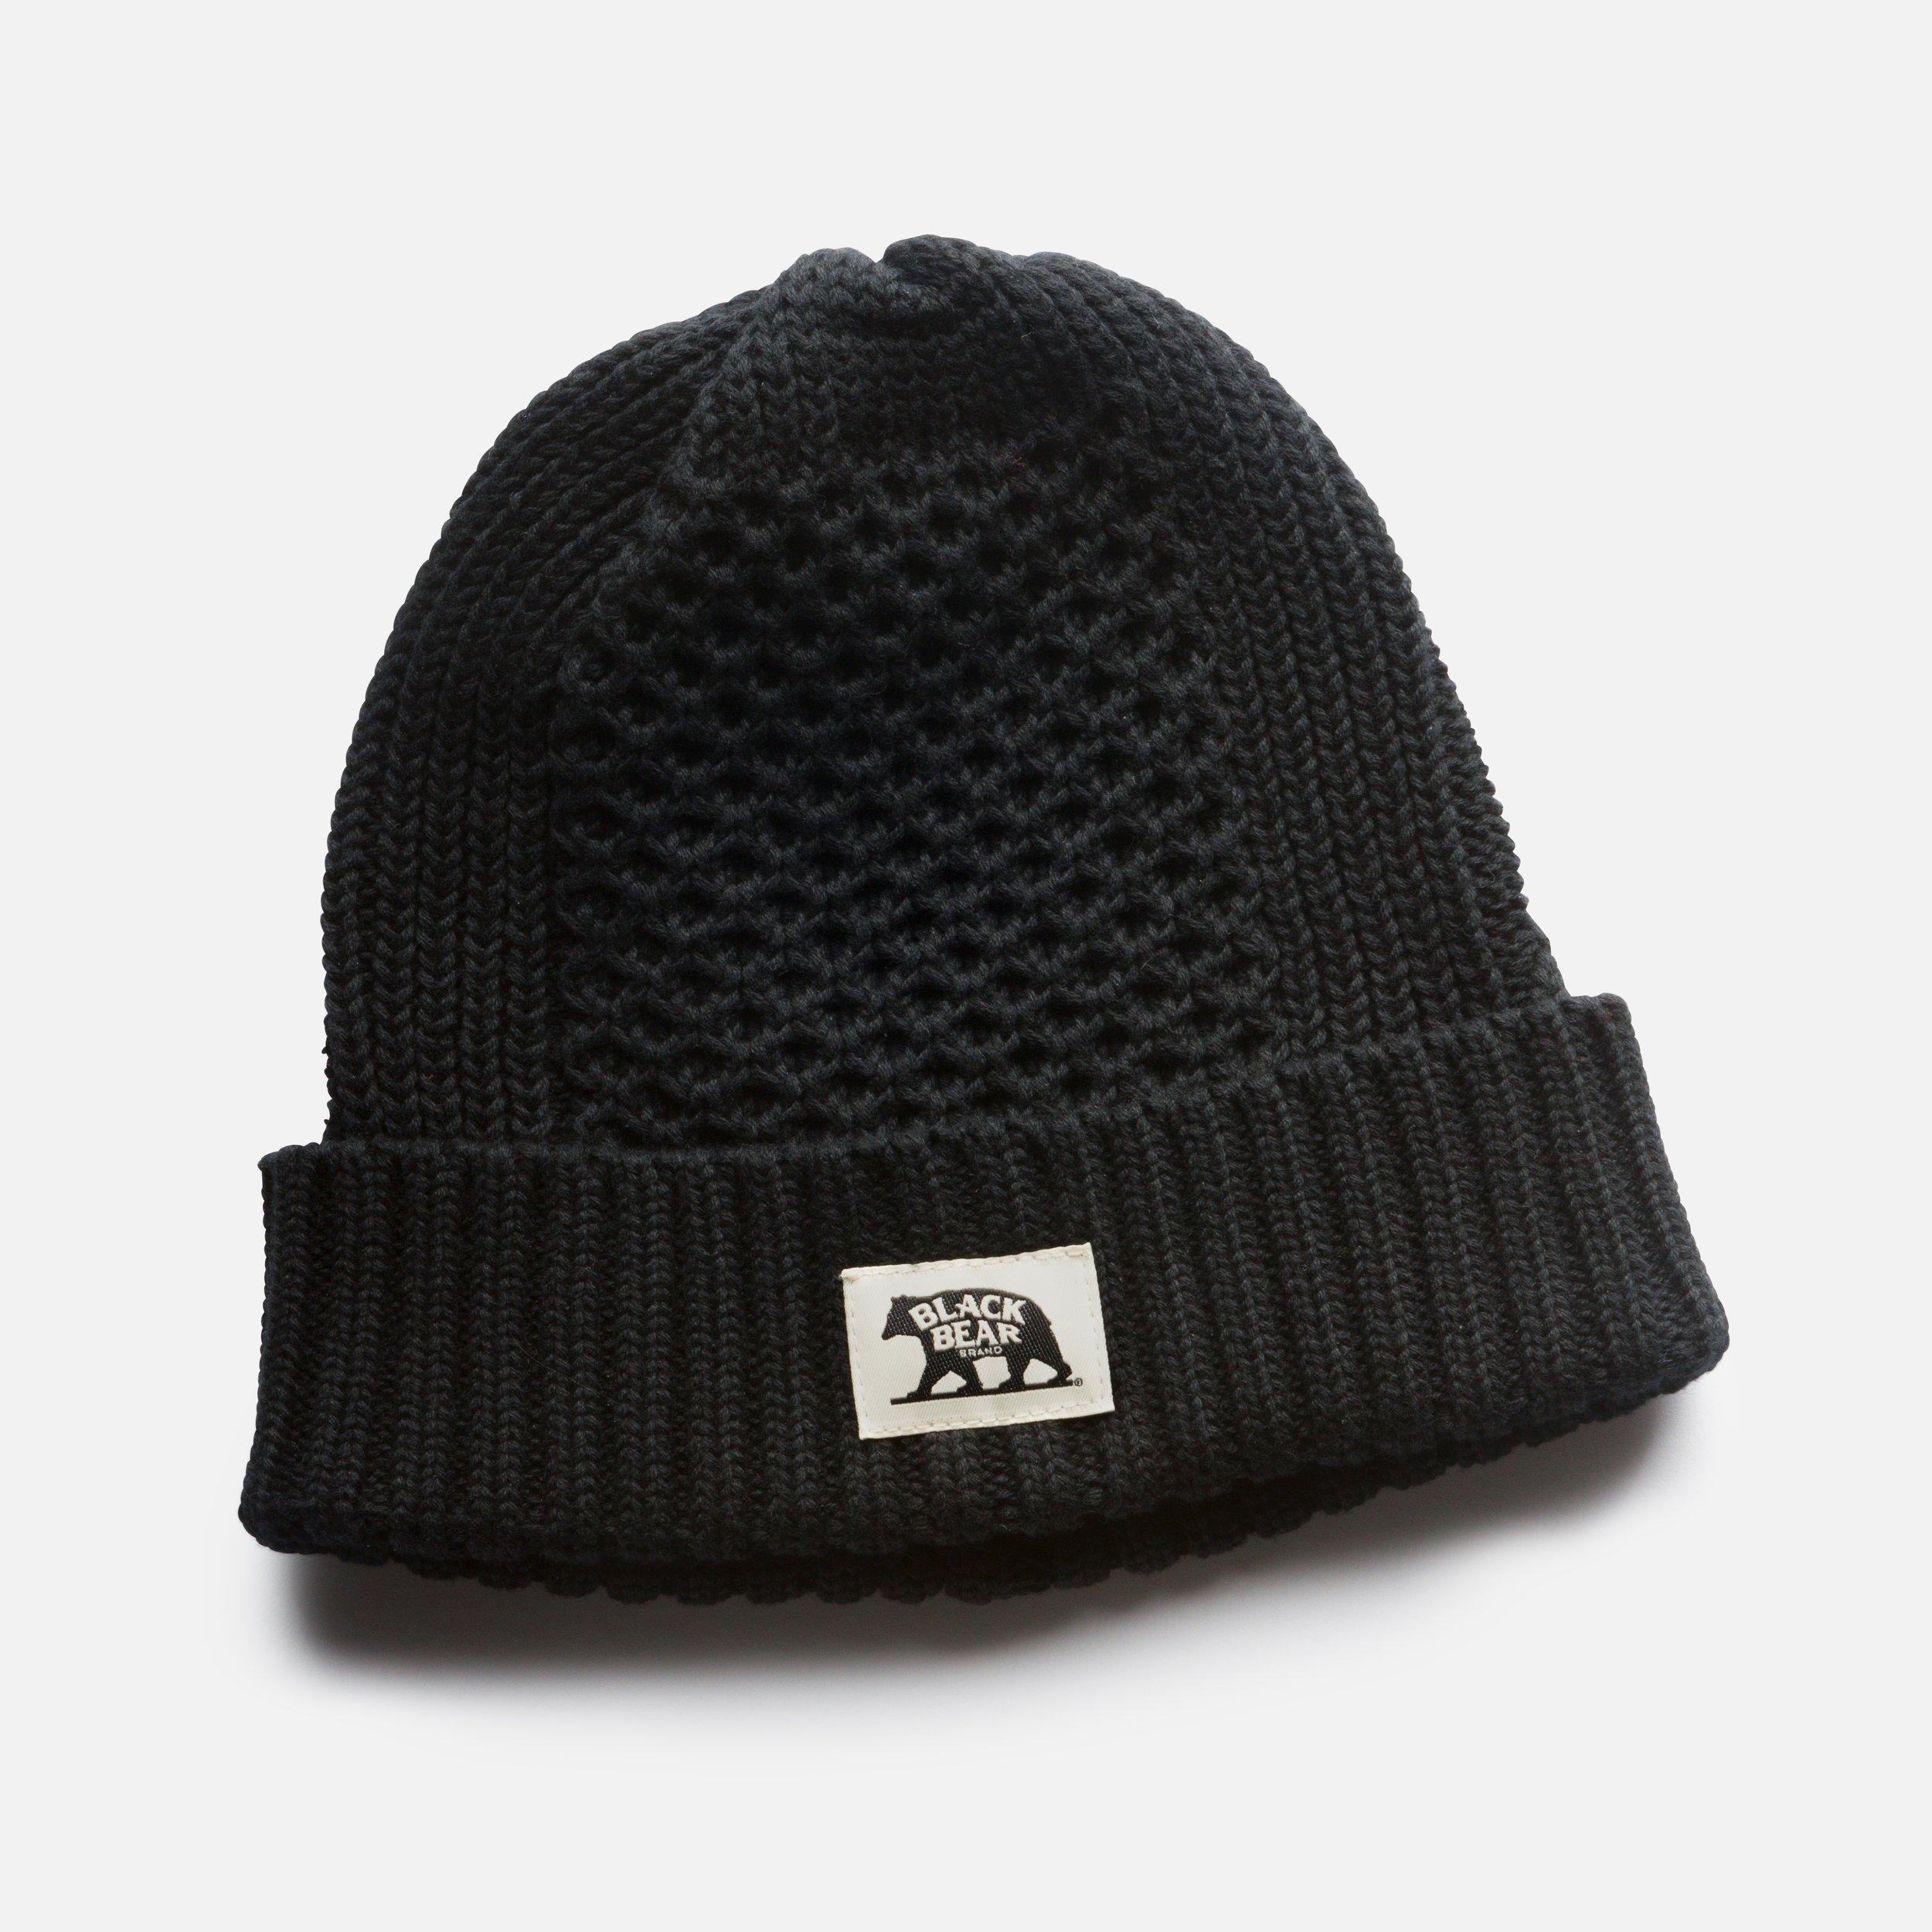 Black Bear Brand x ROTOTO Collaboration - BLACK Cable Knit Watch Cap ...